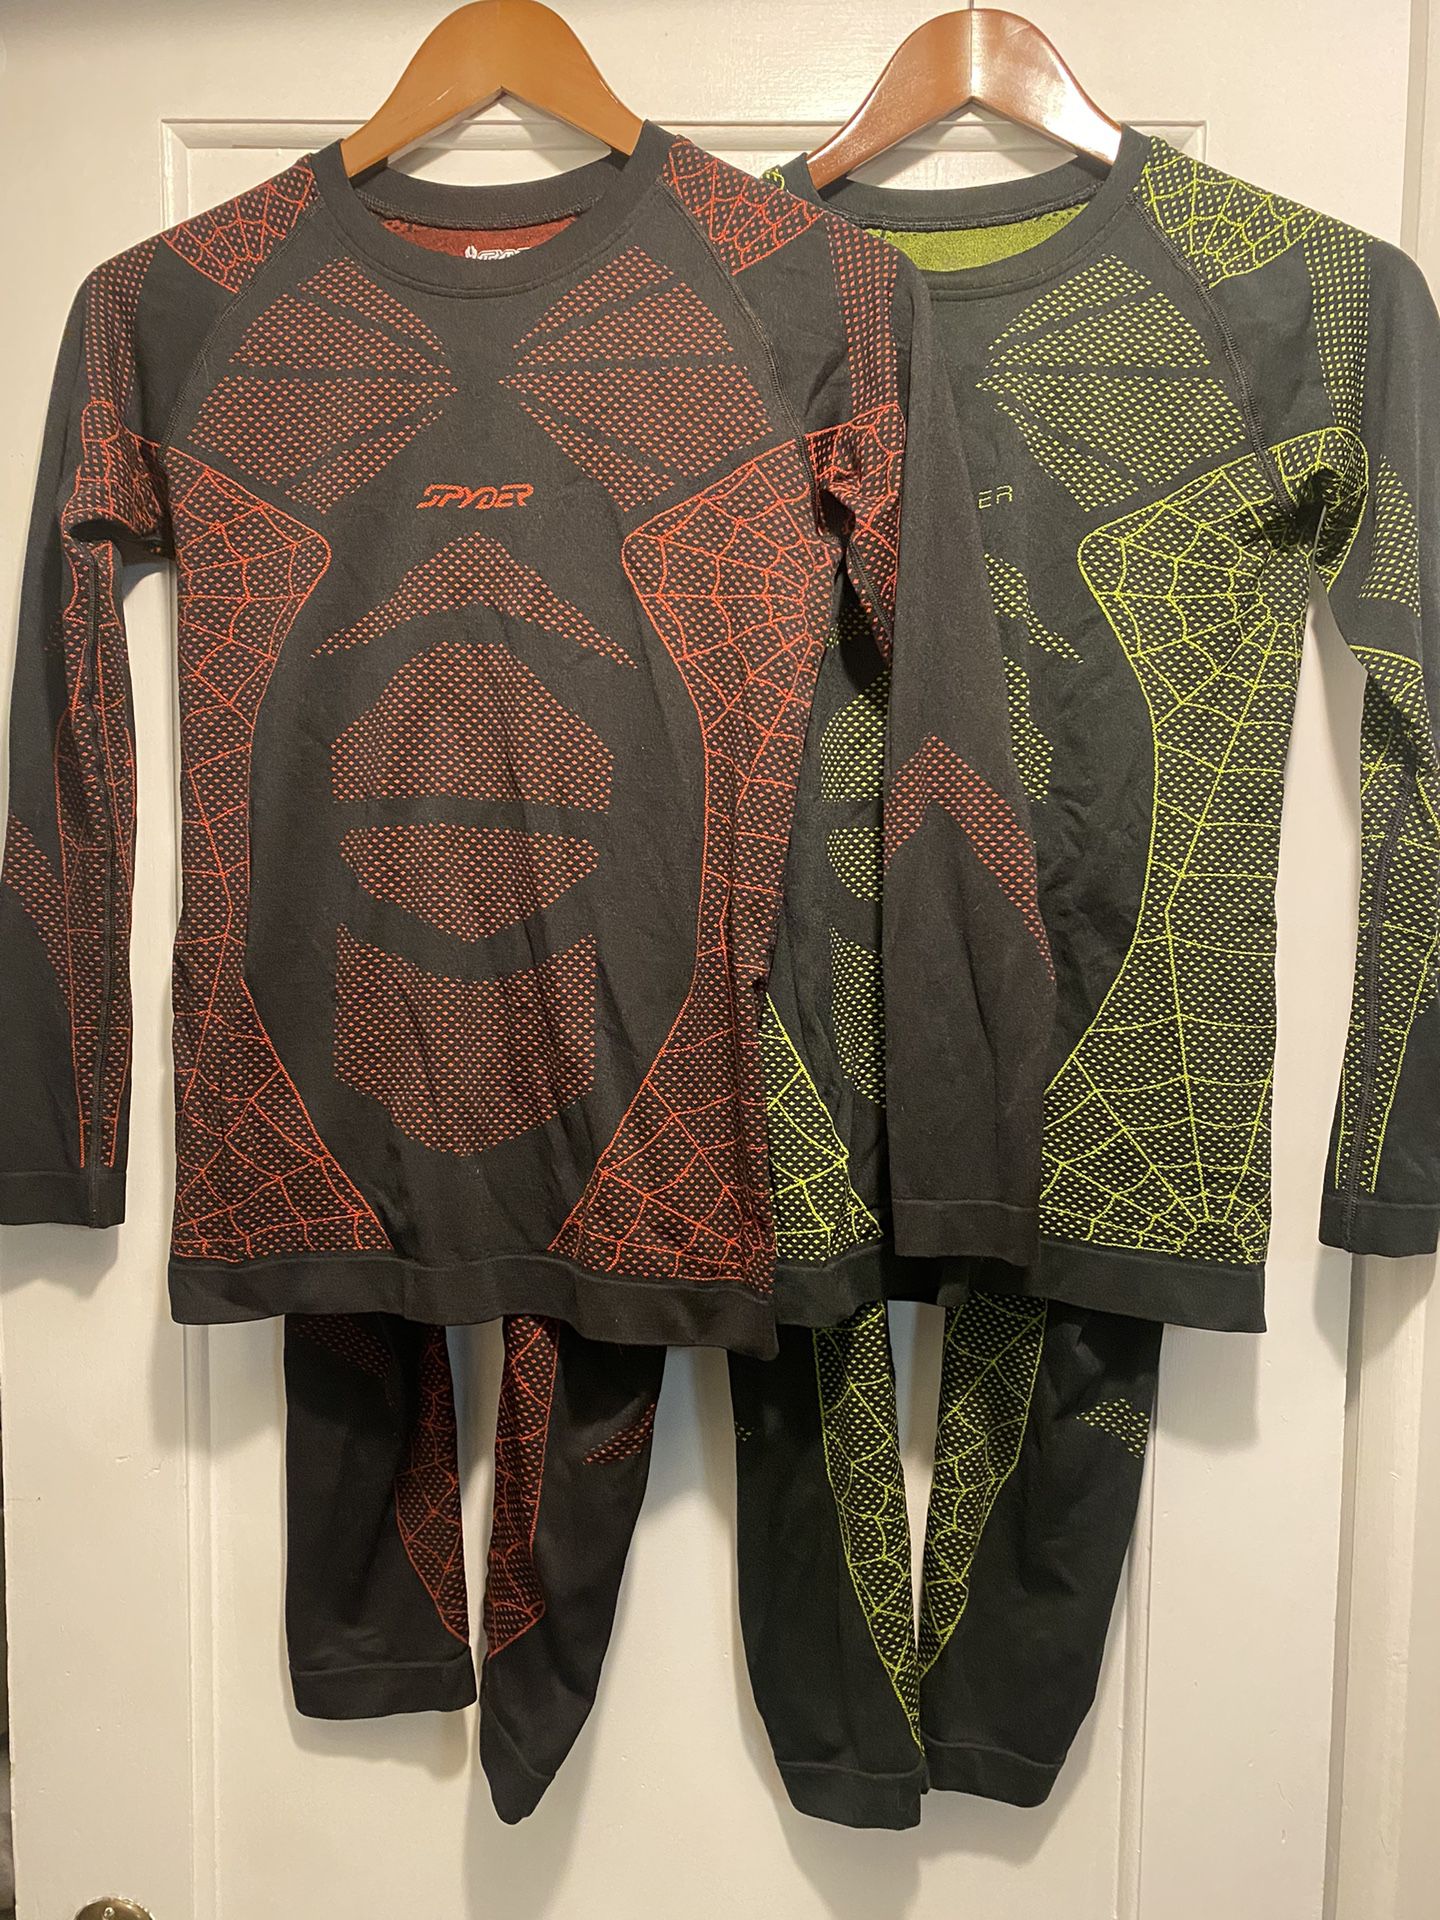 One set of Spyder Caden base layer top and bottoms red or green L/XL kids